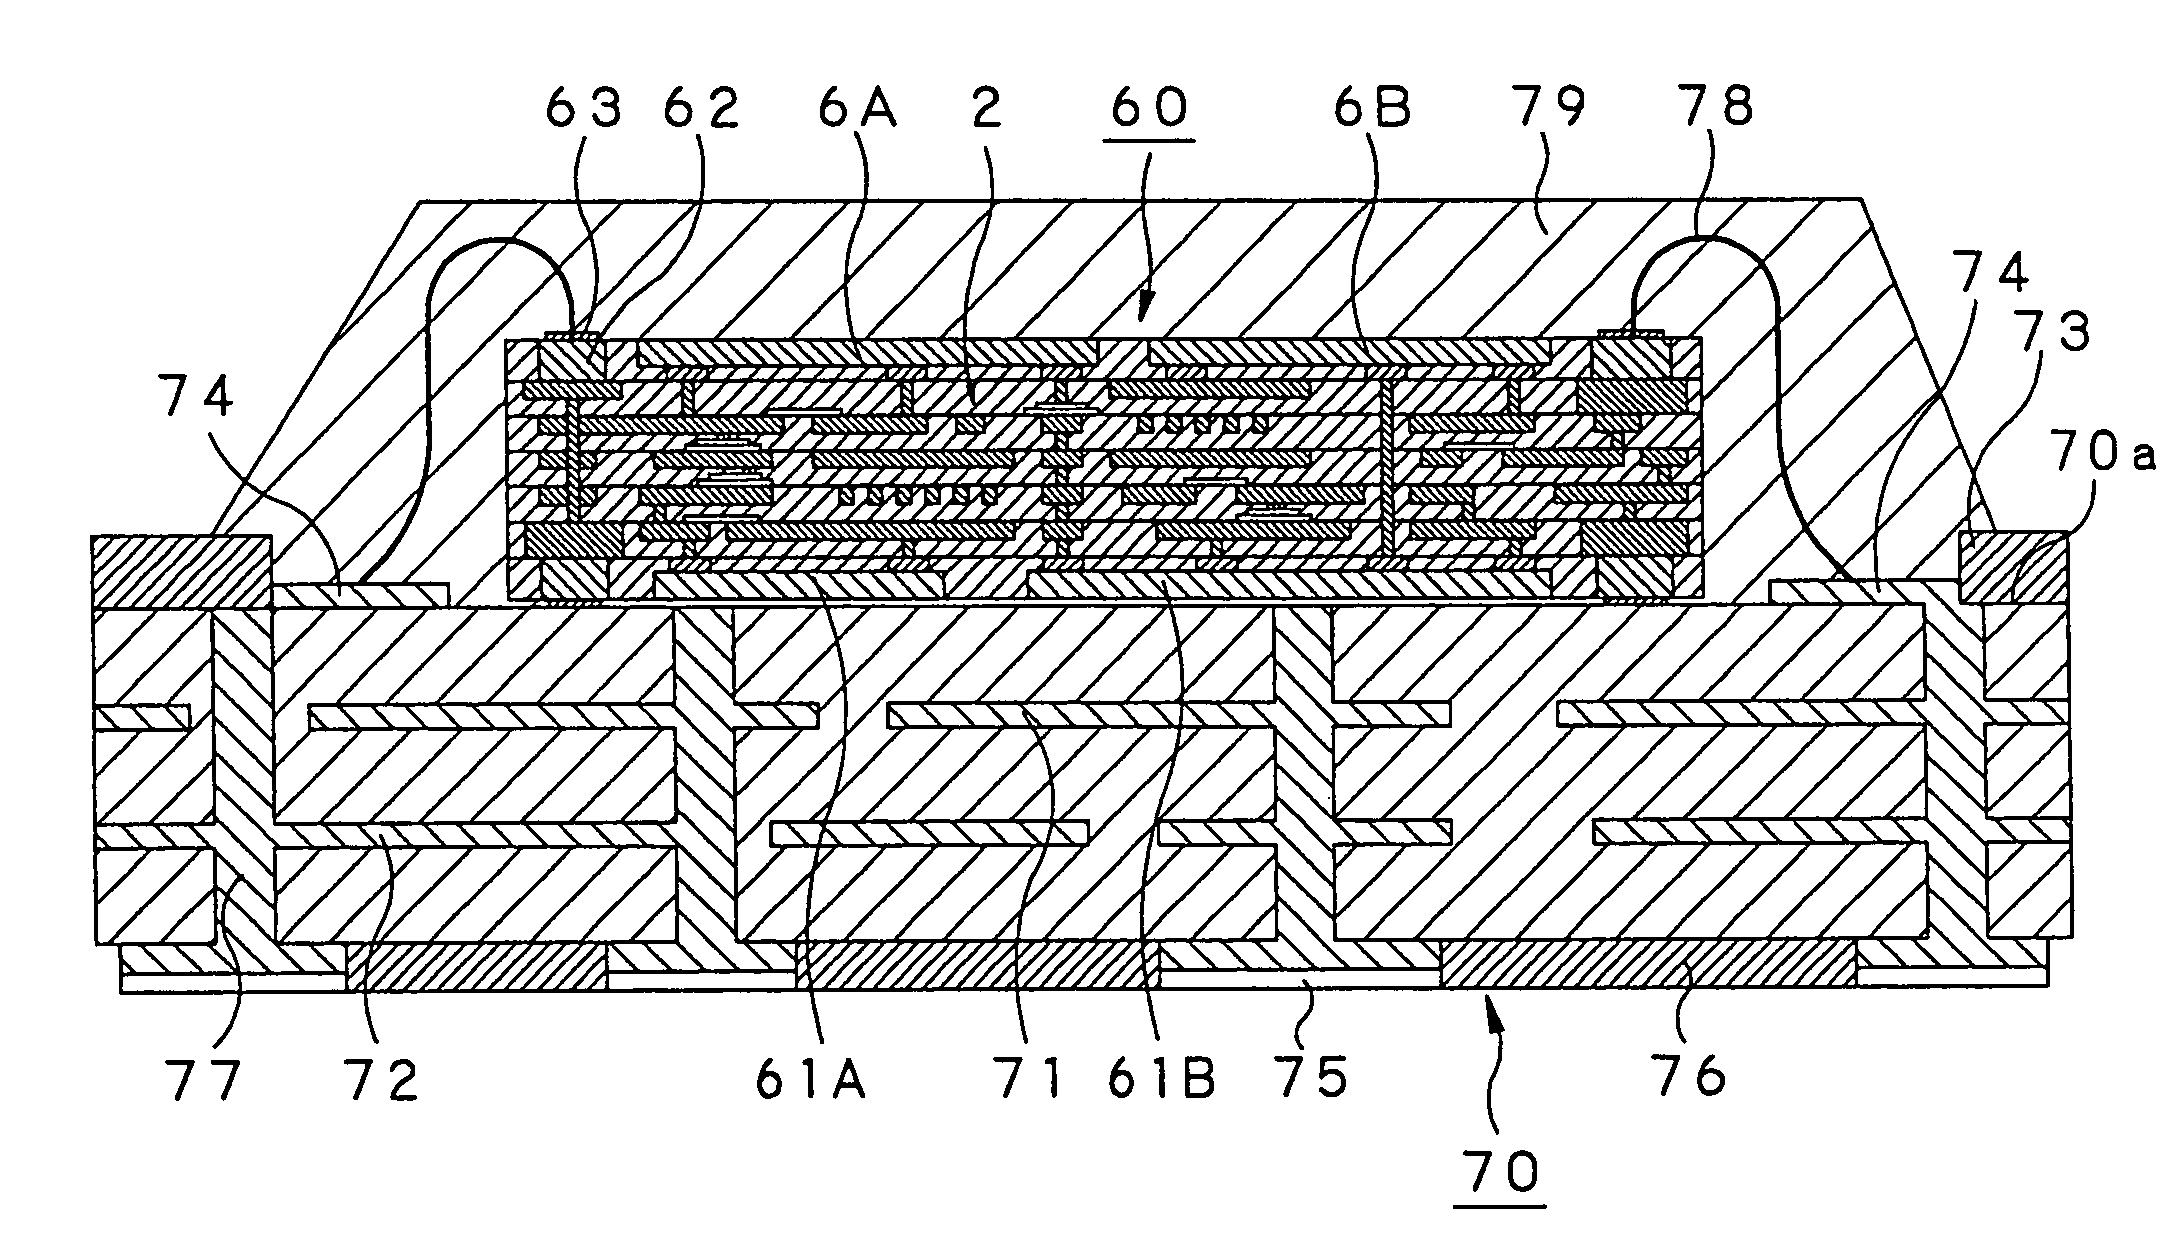 Multi-chip circuit module and method for producing the same